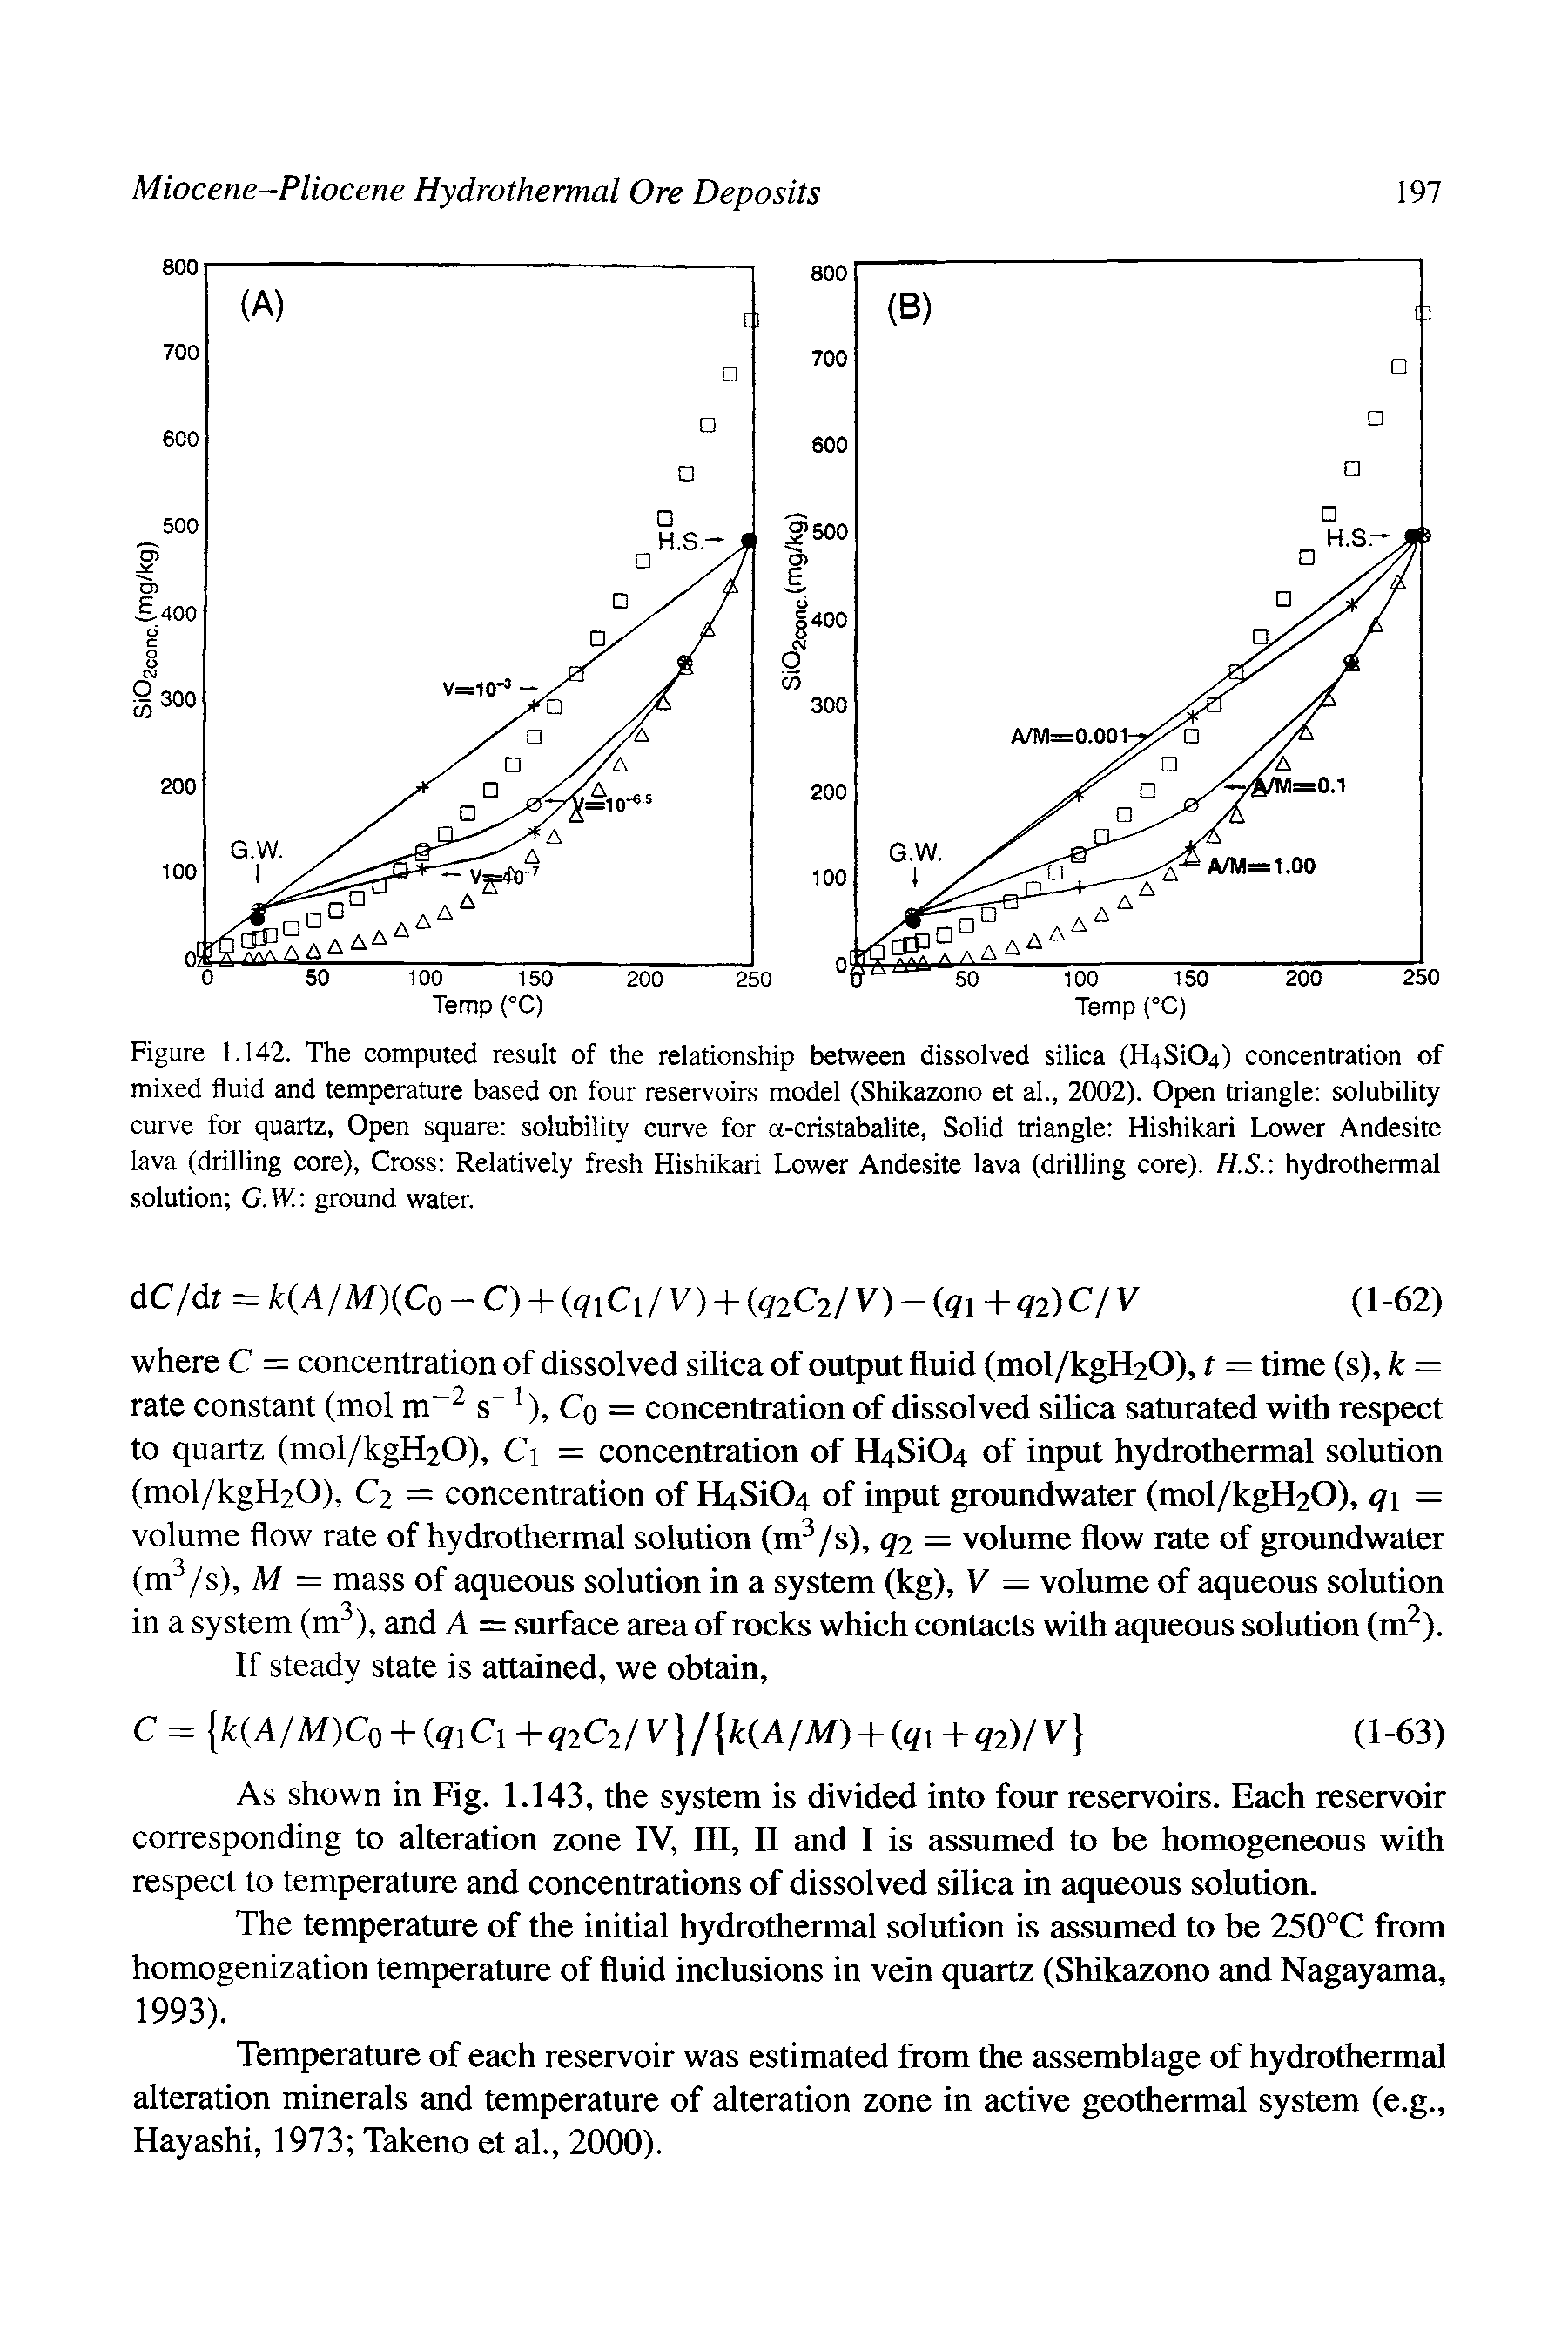 Figure 1.142. The computed result of the relationship between dissolved silica (H4Si04) concentration of mixed fluid and temperature based on four reservoirs model (Shikazono et al, 2002). Open triangle solubility curve for quartz, Open square solubility curve for a-cristabalite, Solid triangle Hishikari Lower Andesite lava (drilling core), Cross Relatively fresh Hishikari Lower Andesite lava (drilling core). H.S. hydrothermal solution G.W. ground water.